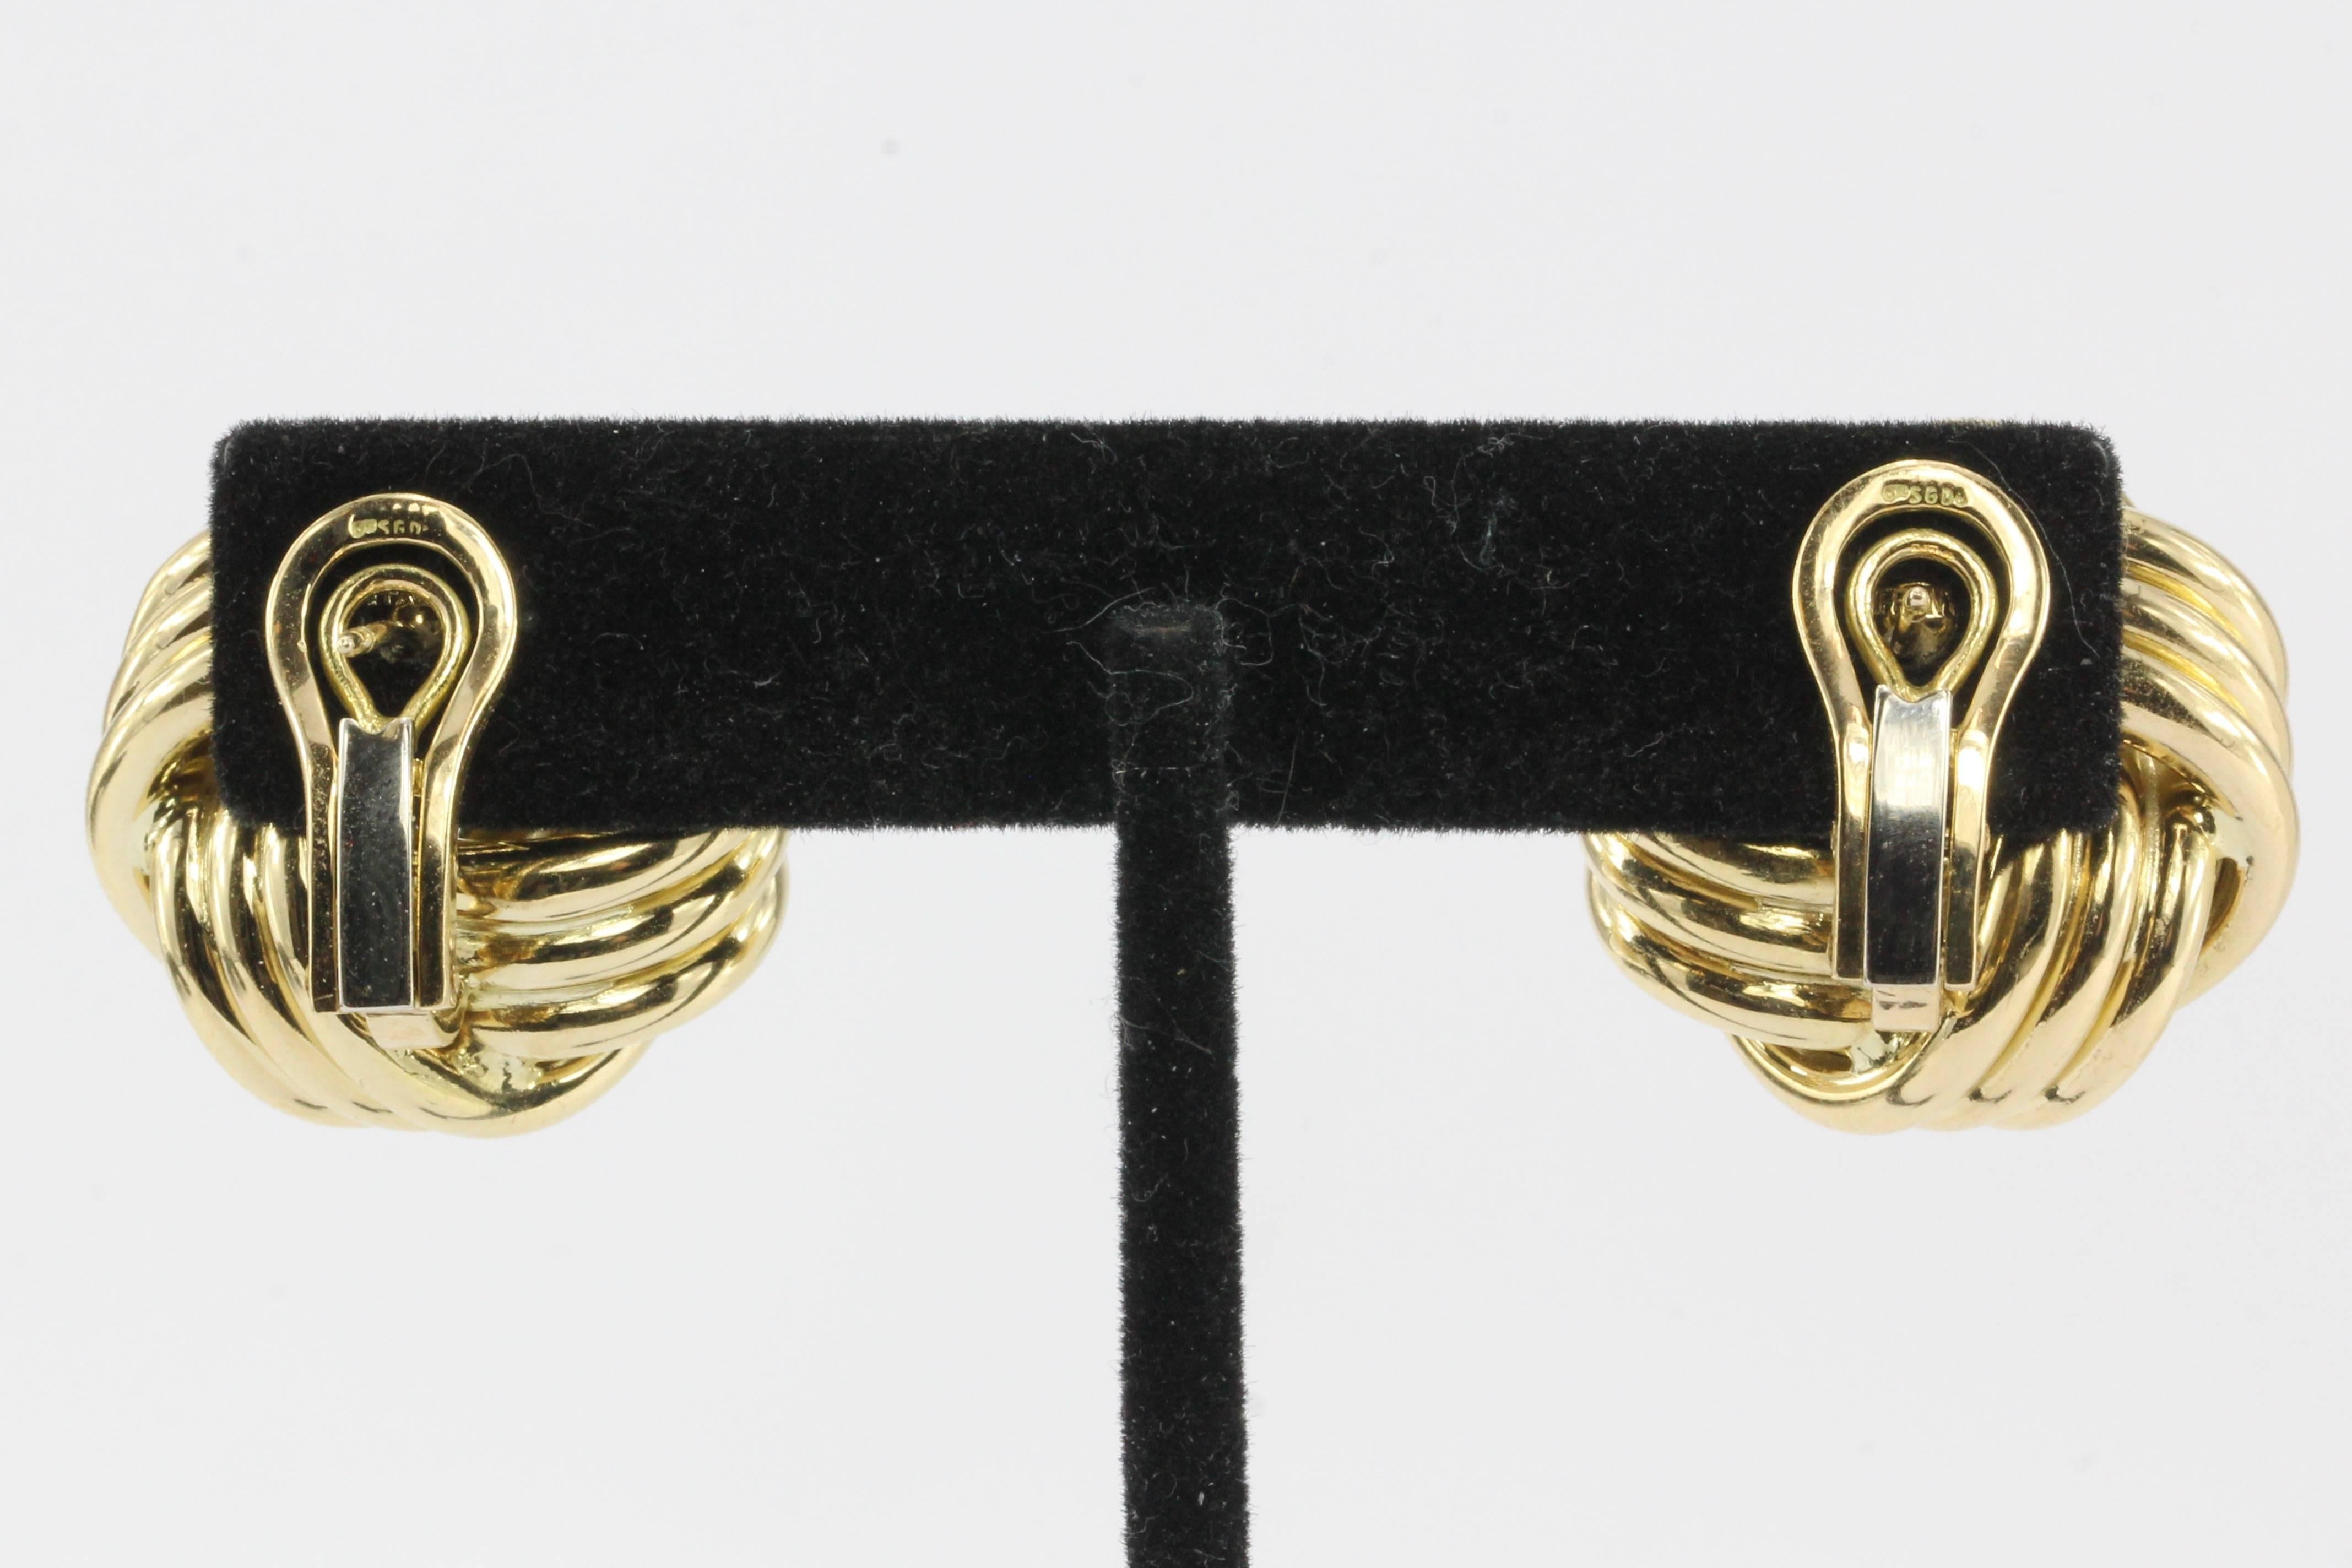 Hallmarks: 750 Tiffany & Co

Composition: 18K Yellow Gold

Earring Measurements: 1